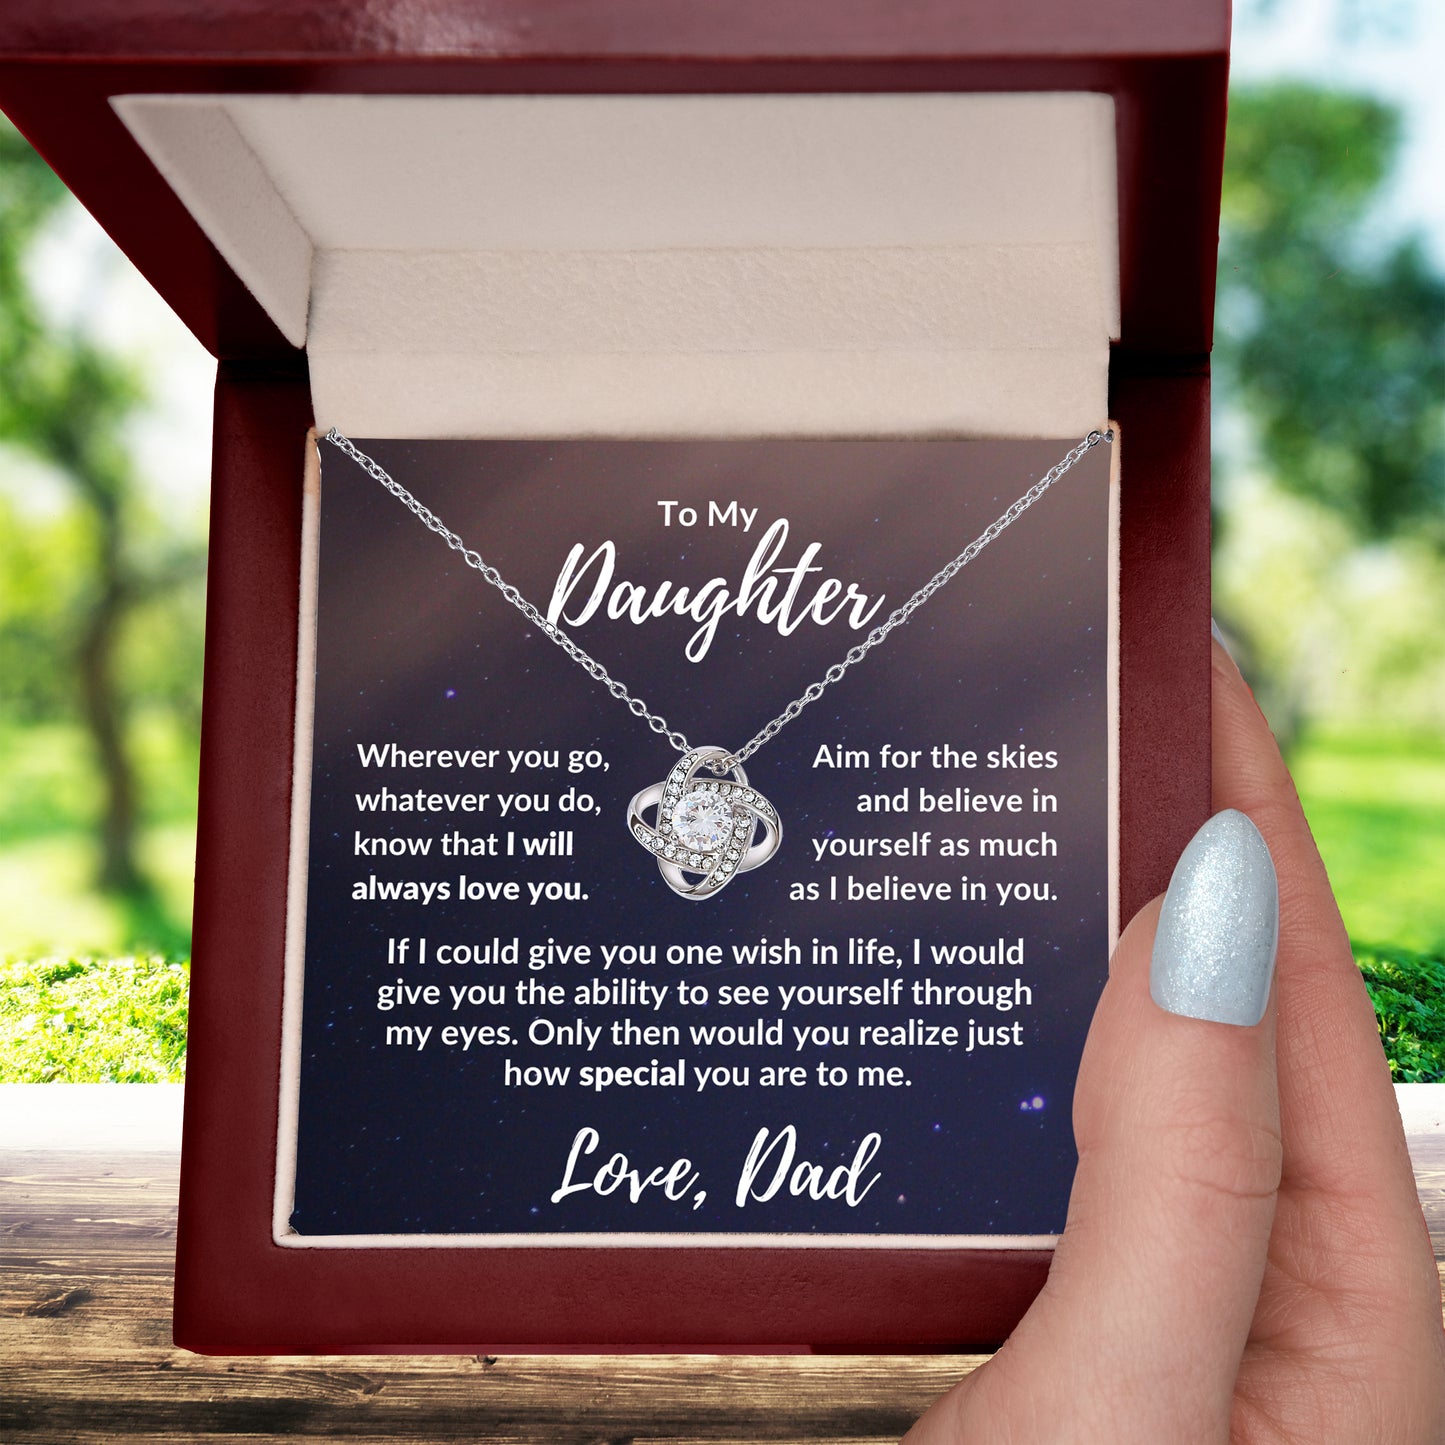 To My Daughter From Dad - I Believe in You - Love Knot Message Card Gift Box